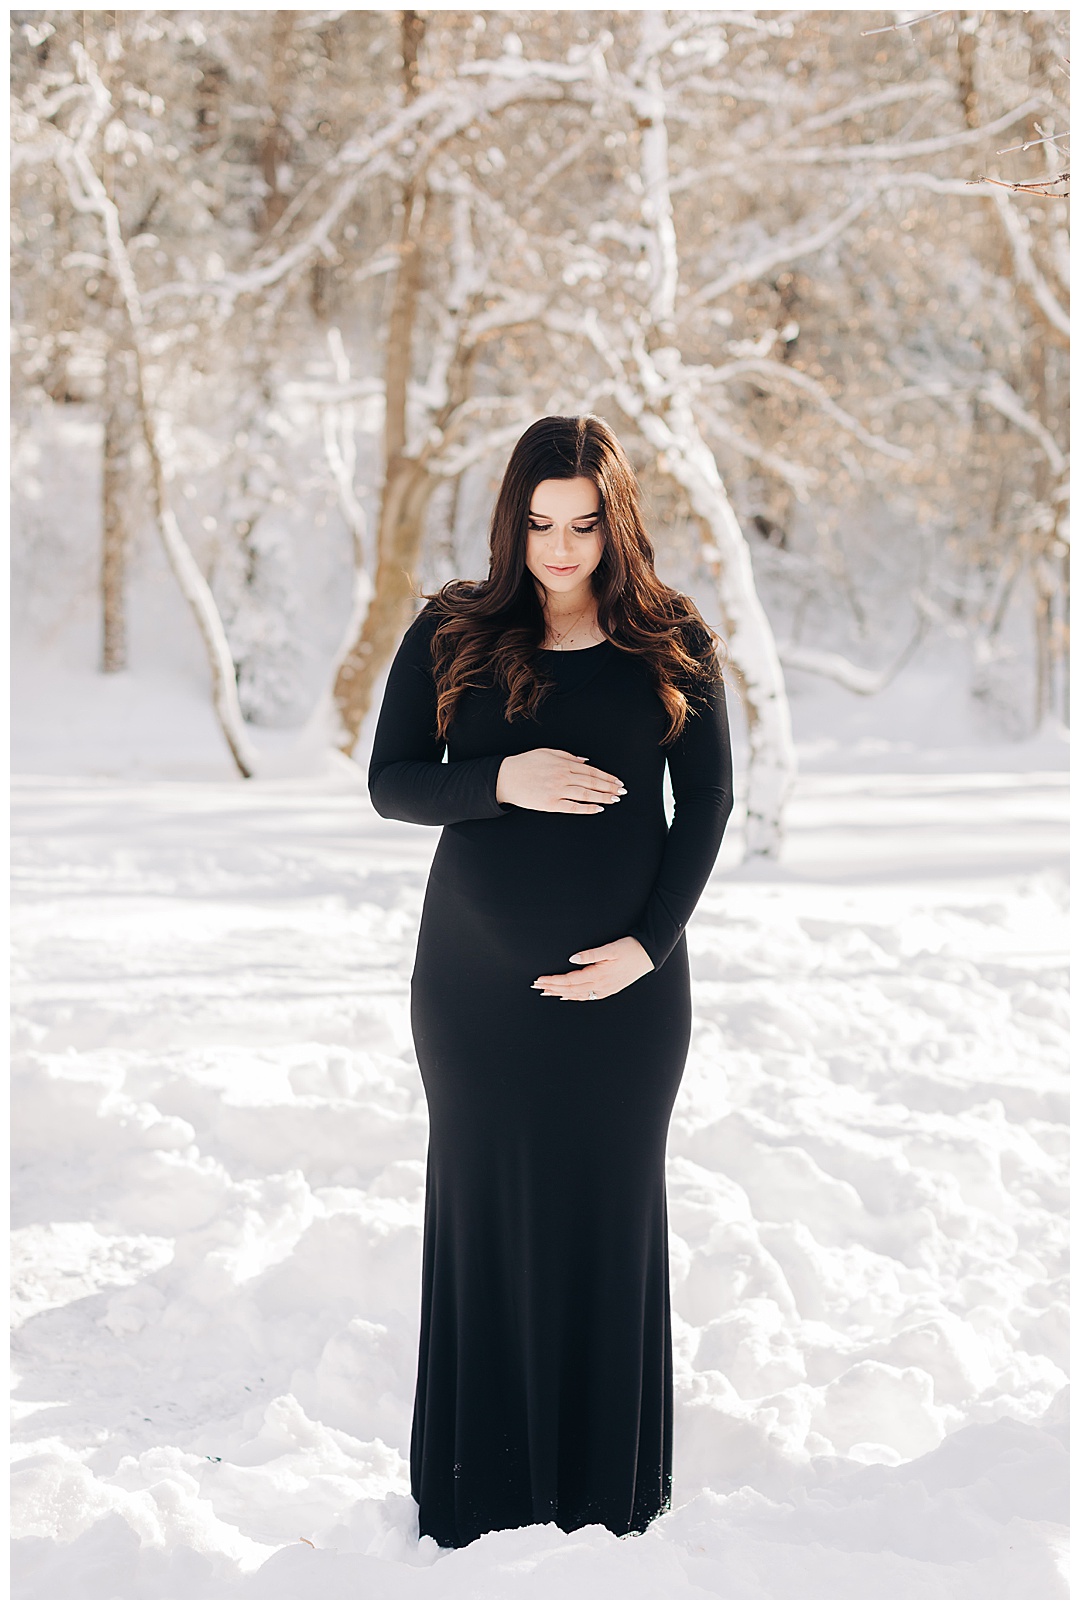 Snowy Maternity Session | Tibble Fork